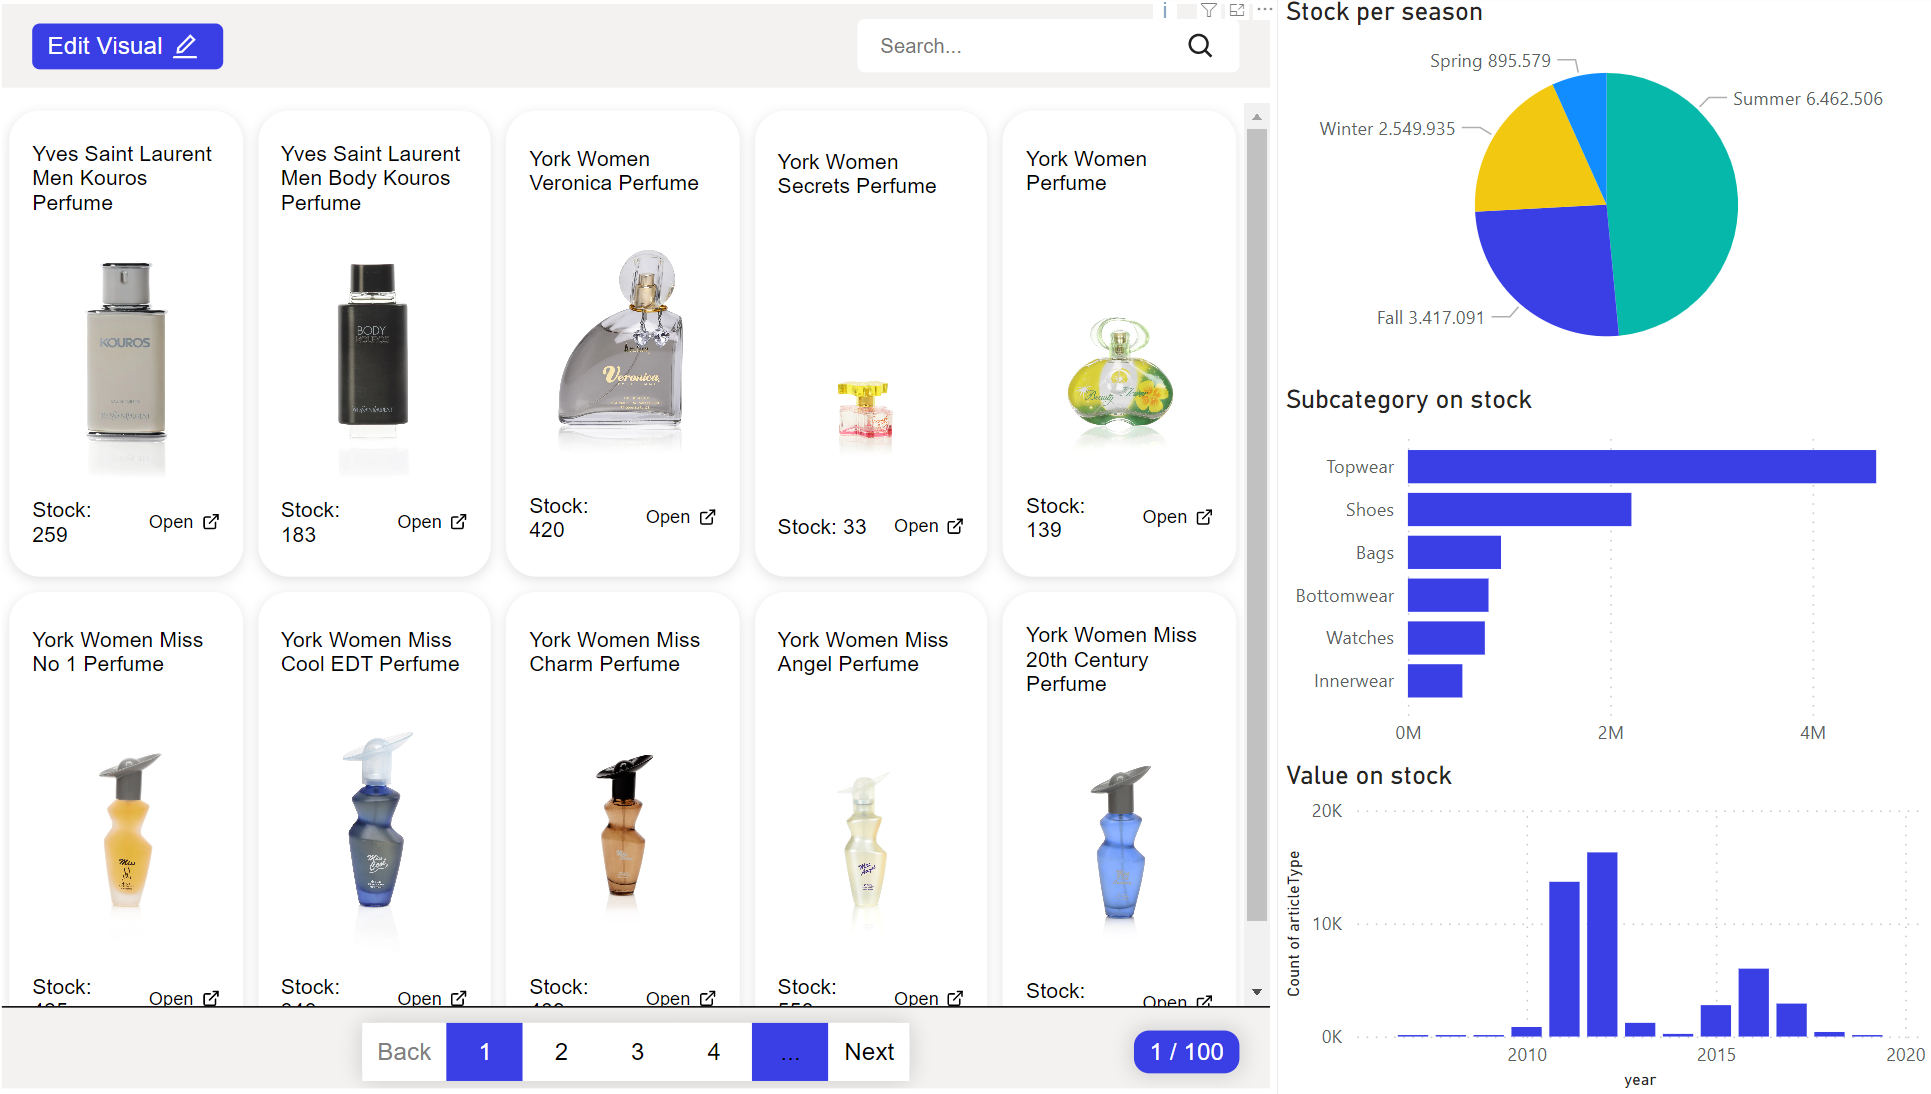 Product page PictureThis in Power BI